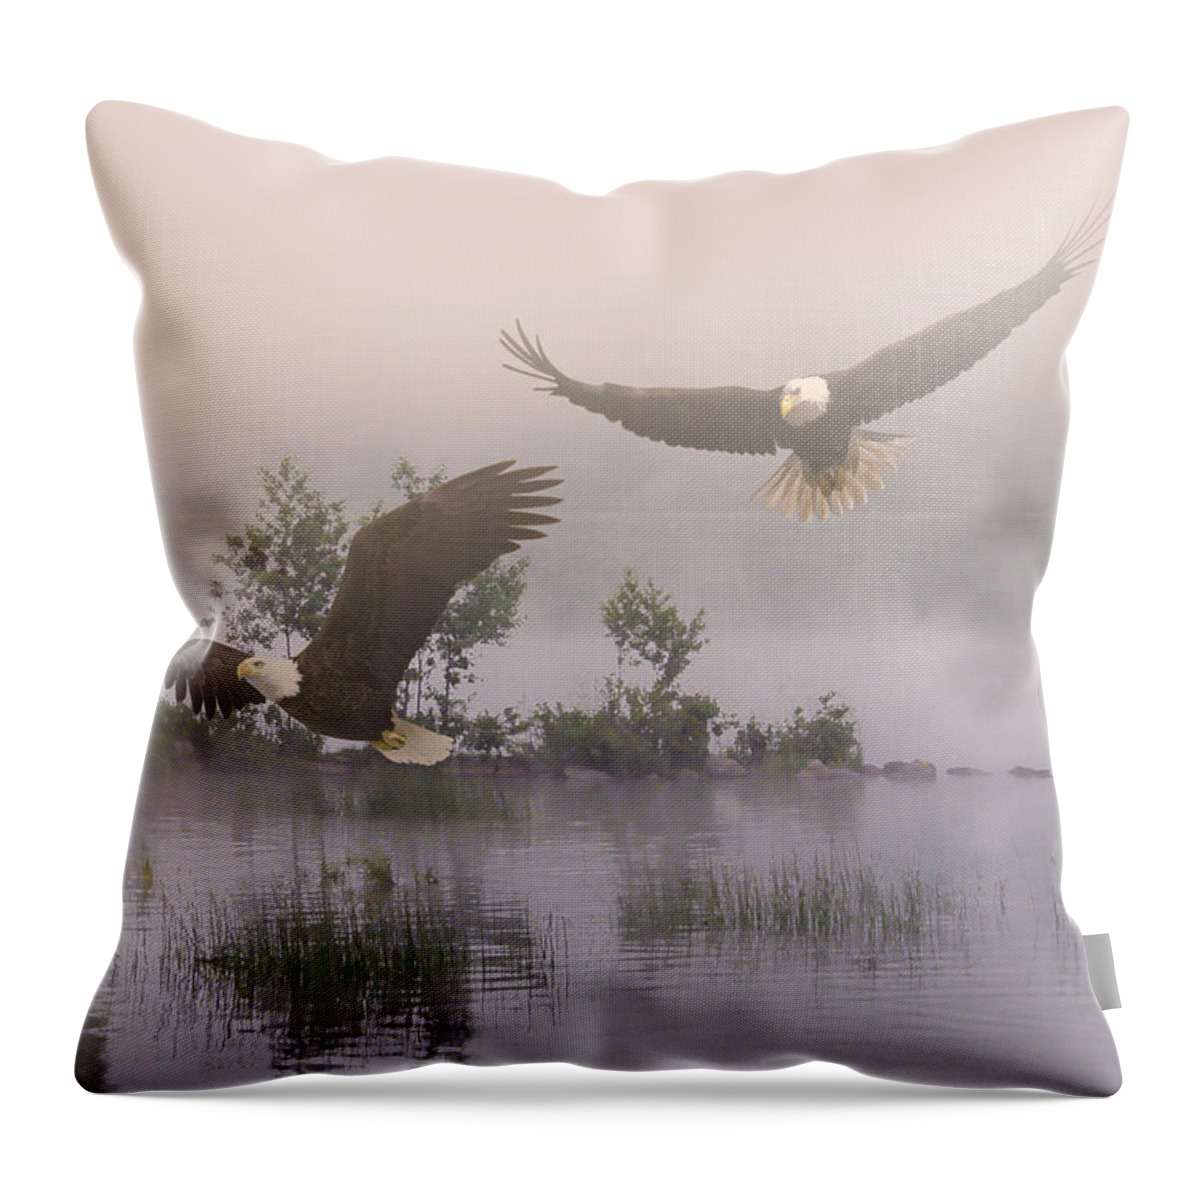 Eagles Throw Pillow featuring the digital art Eagles at Dawn by M Spadecaller